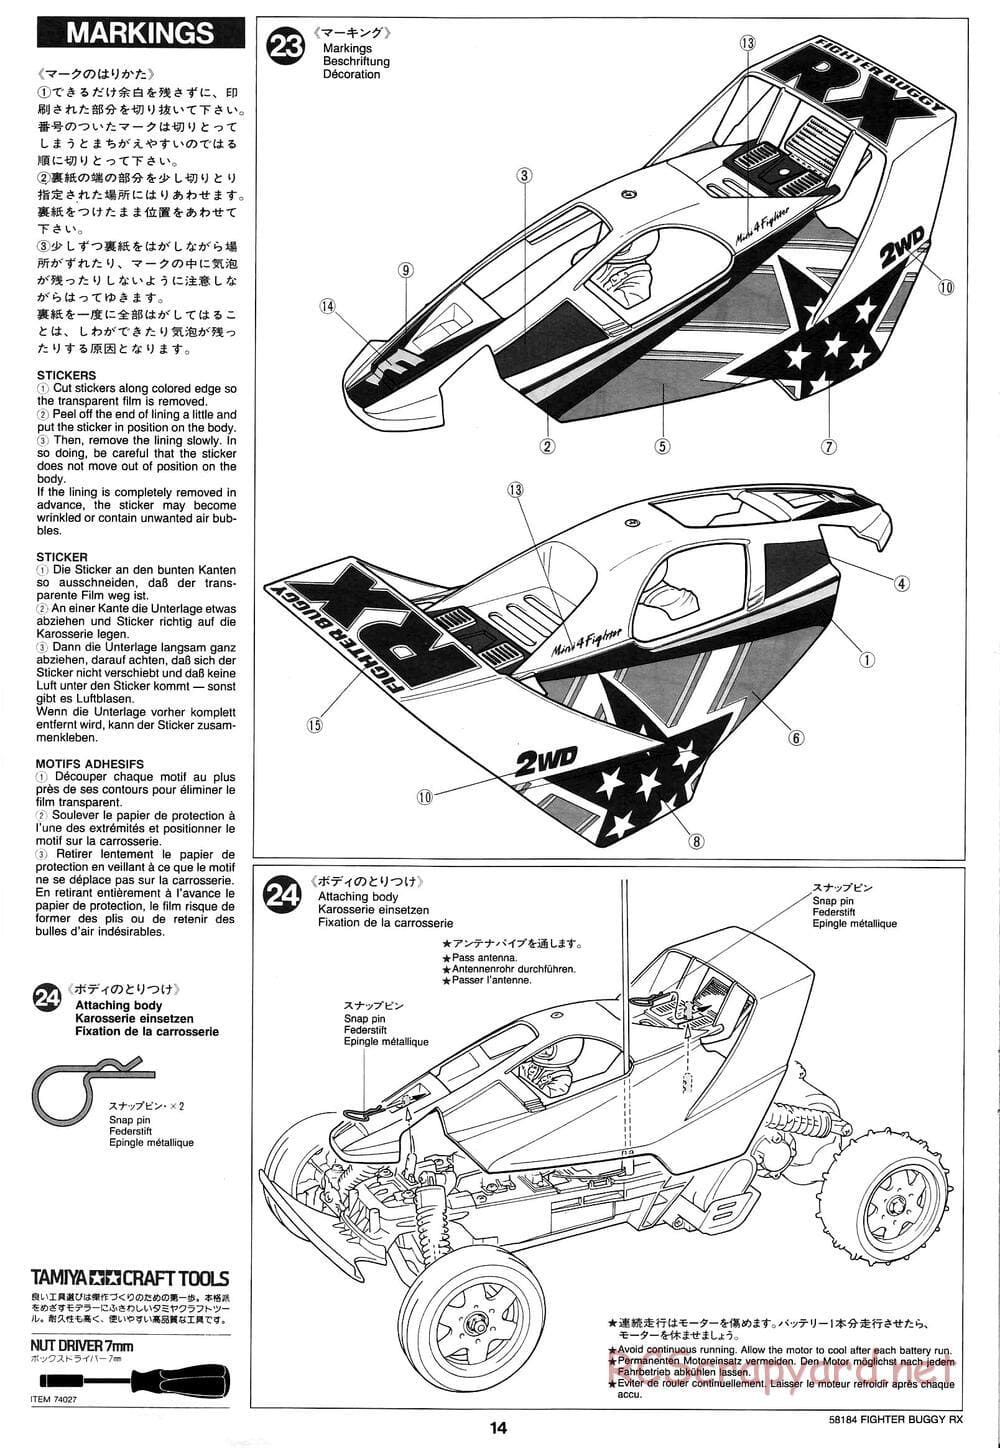 Tamiya - Fighter Buggy RX Chassis - Manual - Page 14